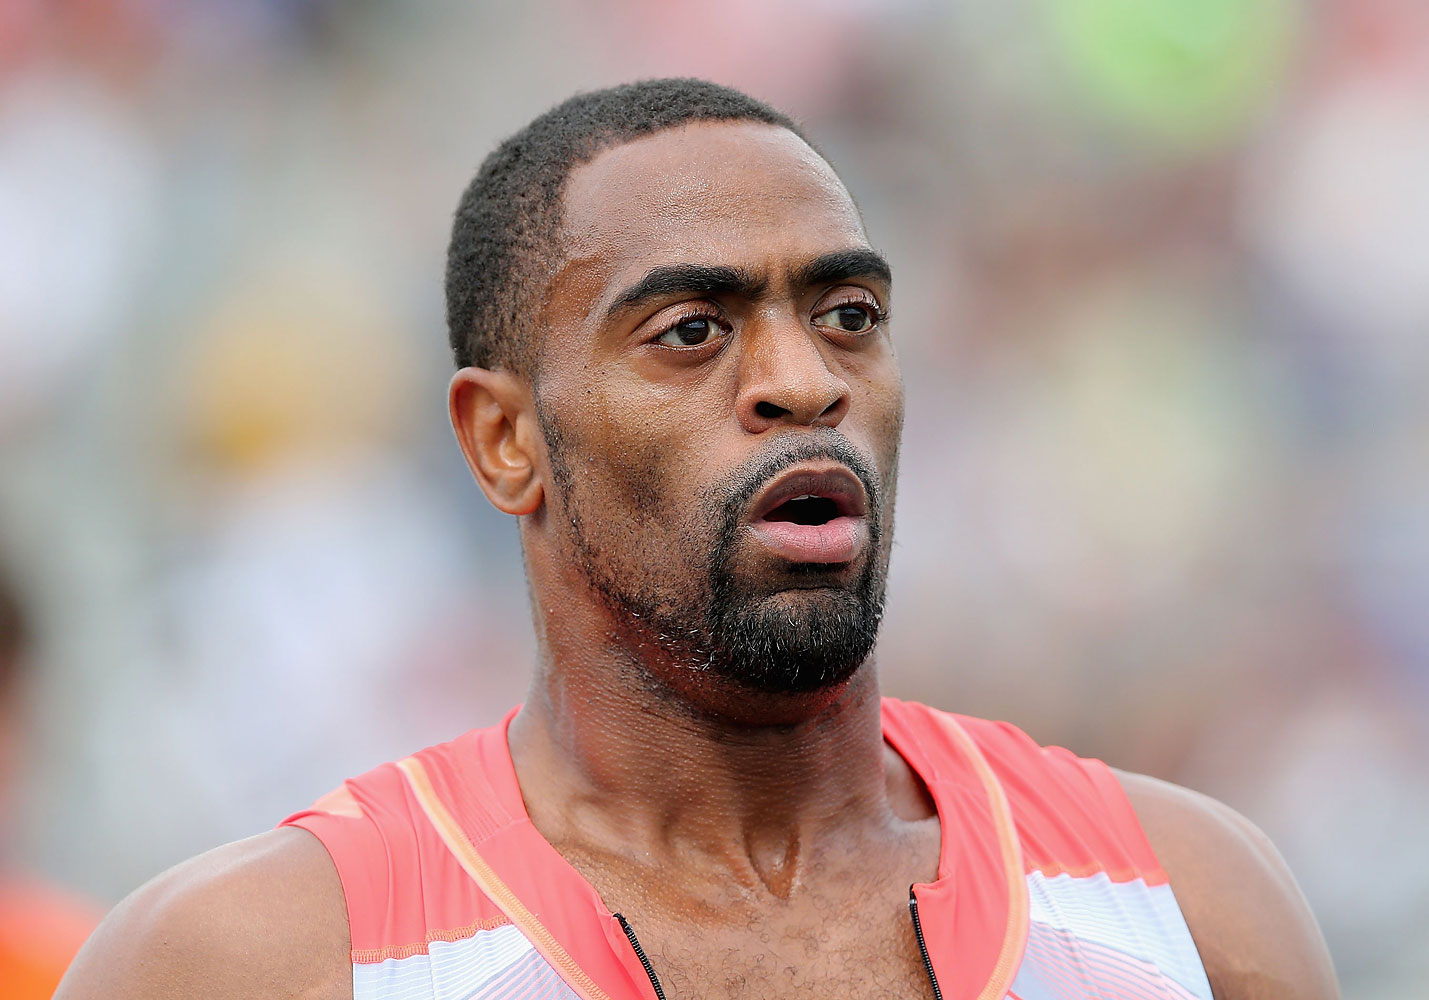 Tyson Gay, Olympic sprinter, smiling and wearing a USA track suit